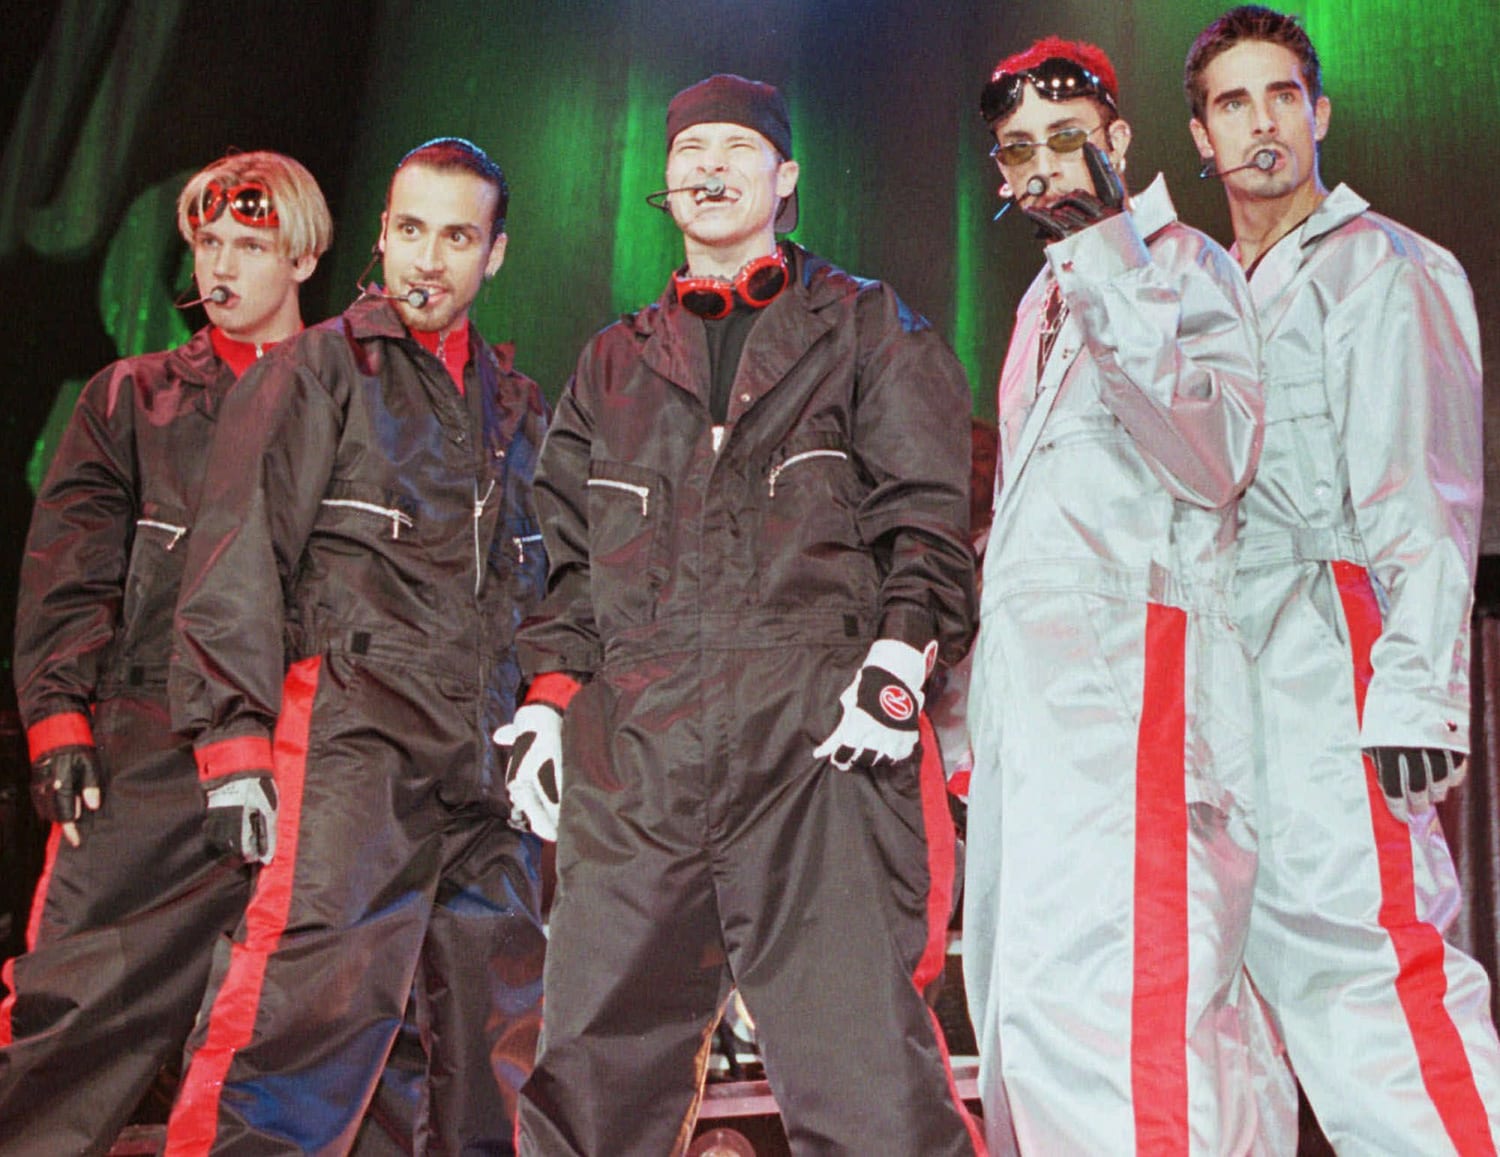 Backstreet Boys Reveal Why They Broke Up — And Got Back